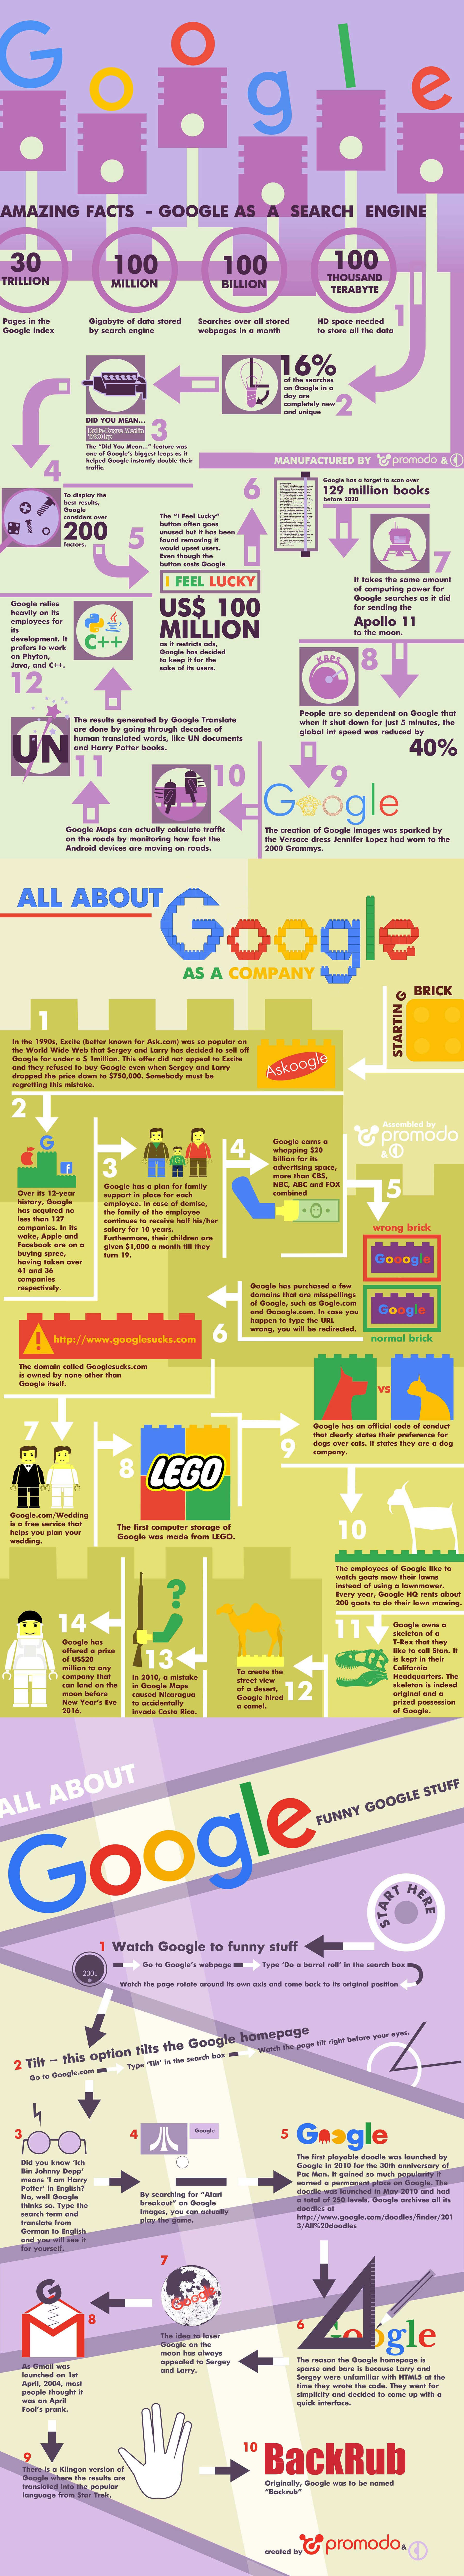 36 Interesting and Fun Facts About Google